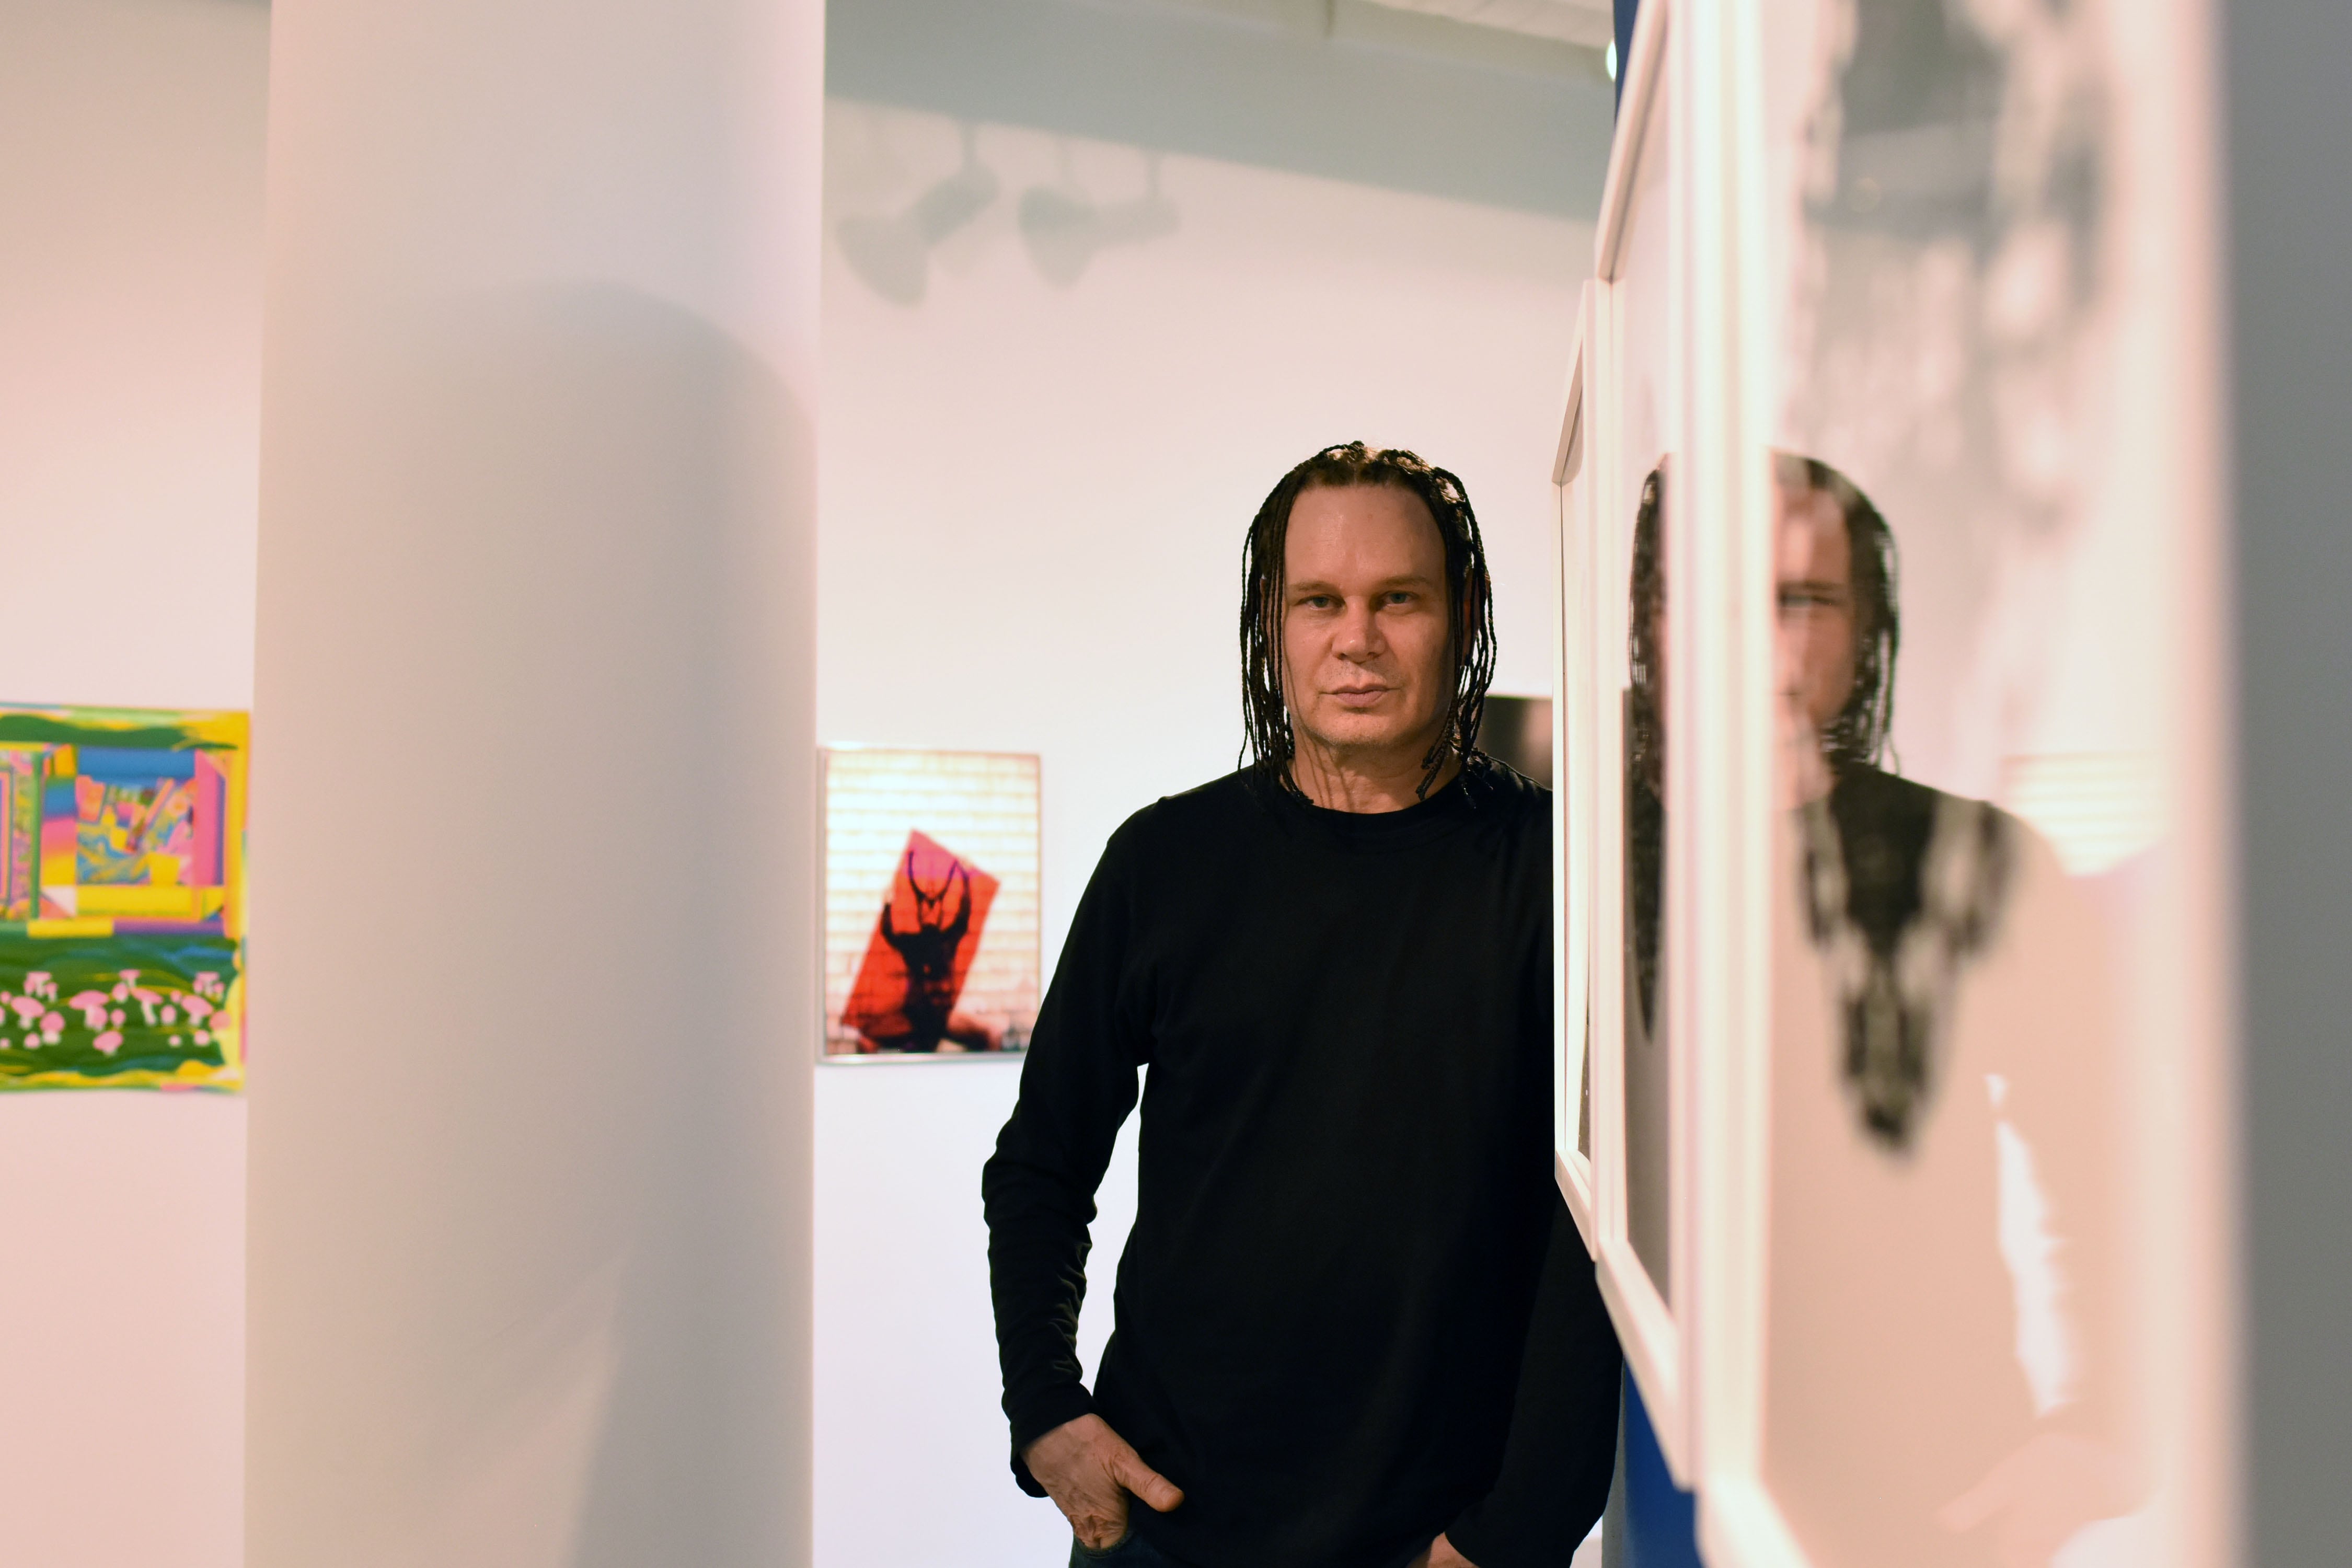 A person wearing all black poses for a portrait leaning up against an art gallery wall with art on the walls in the background.